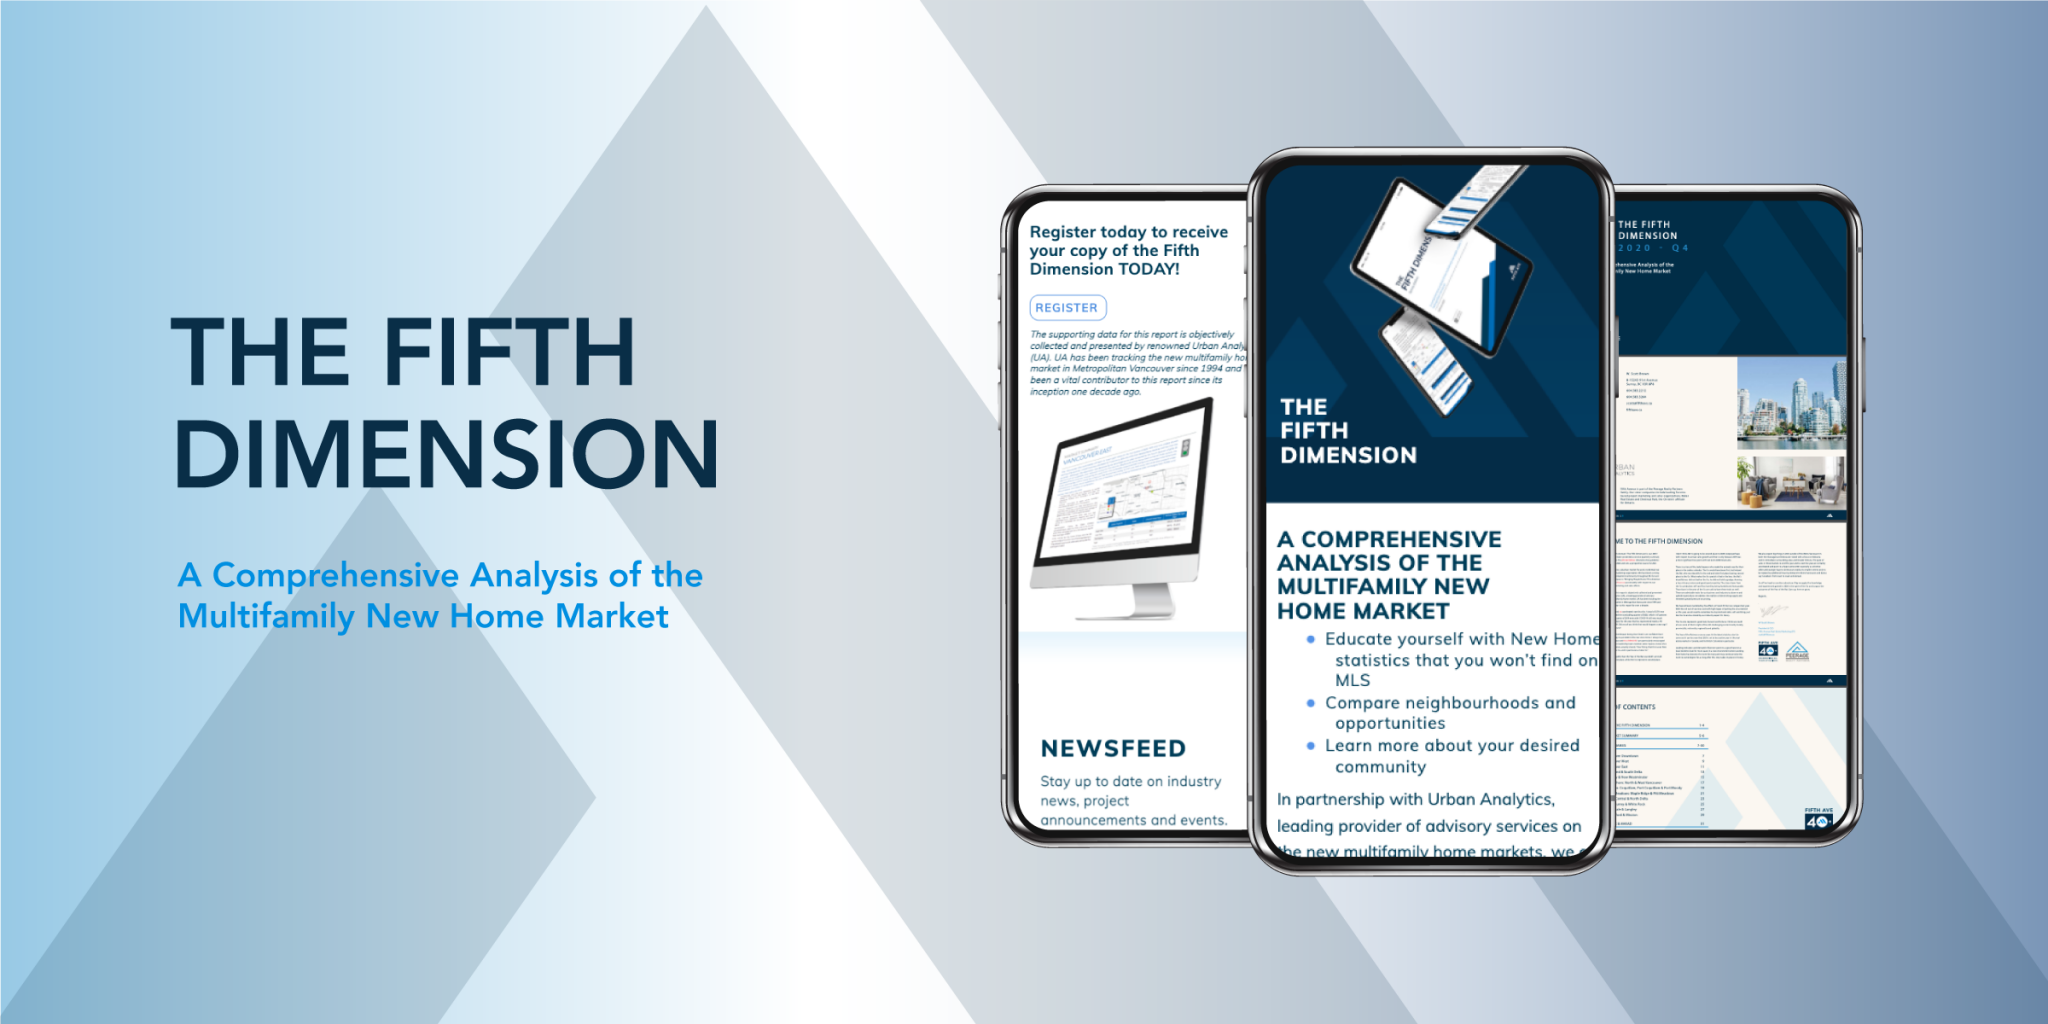 The Winter edition of Fifth Avenue’s ‘The Fifth Dimension’ is our 40th! For over 10 years we have been presented a concise quarterly summary of the multifamily market. This Winter Edition chronicles the pandemic-influenced year that was 2020 and sets a perspective course for 2021.